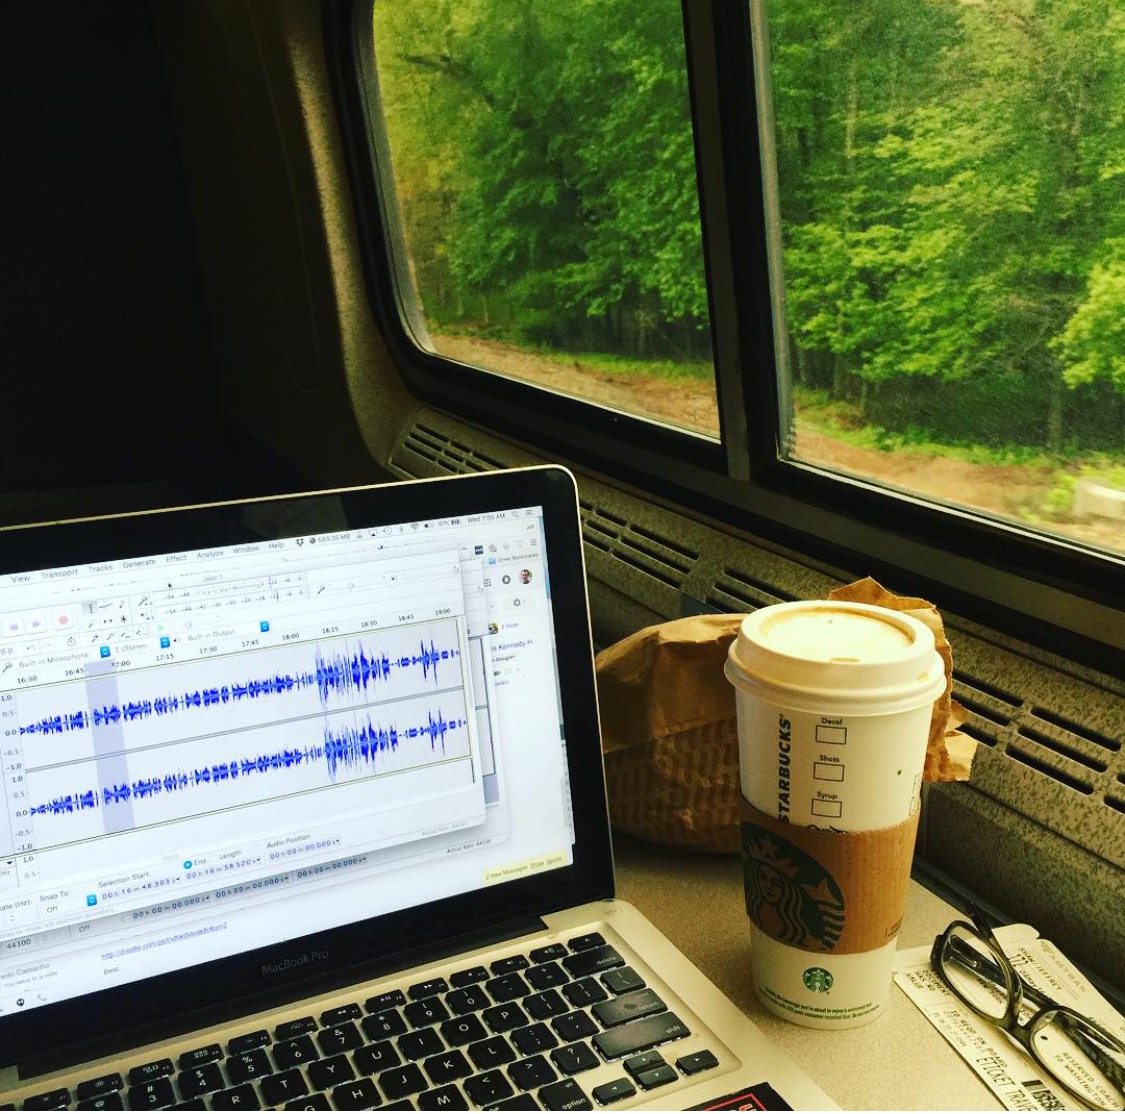 Speaking of training, I just edited a bunch of audio on the train back from NYC. Good times.